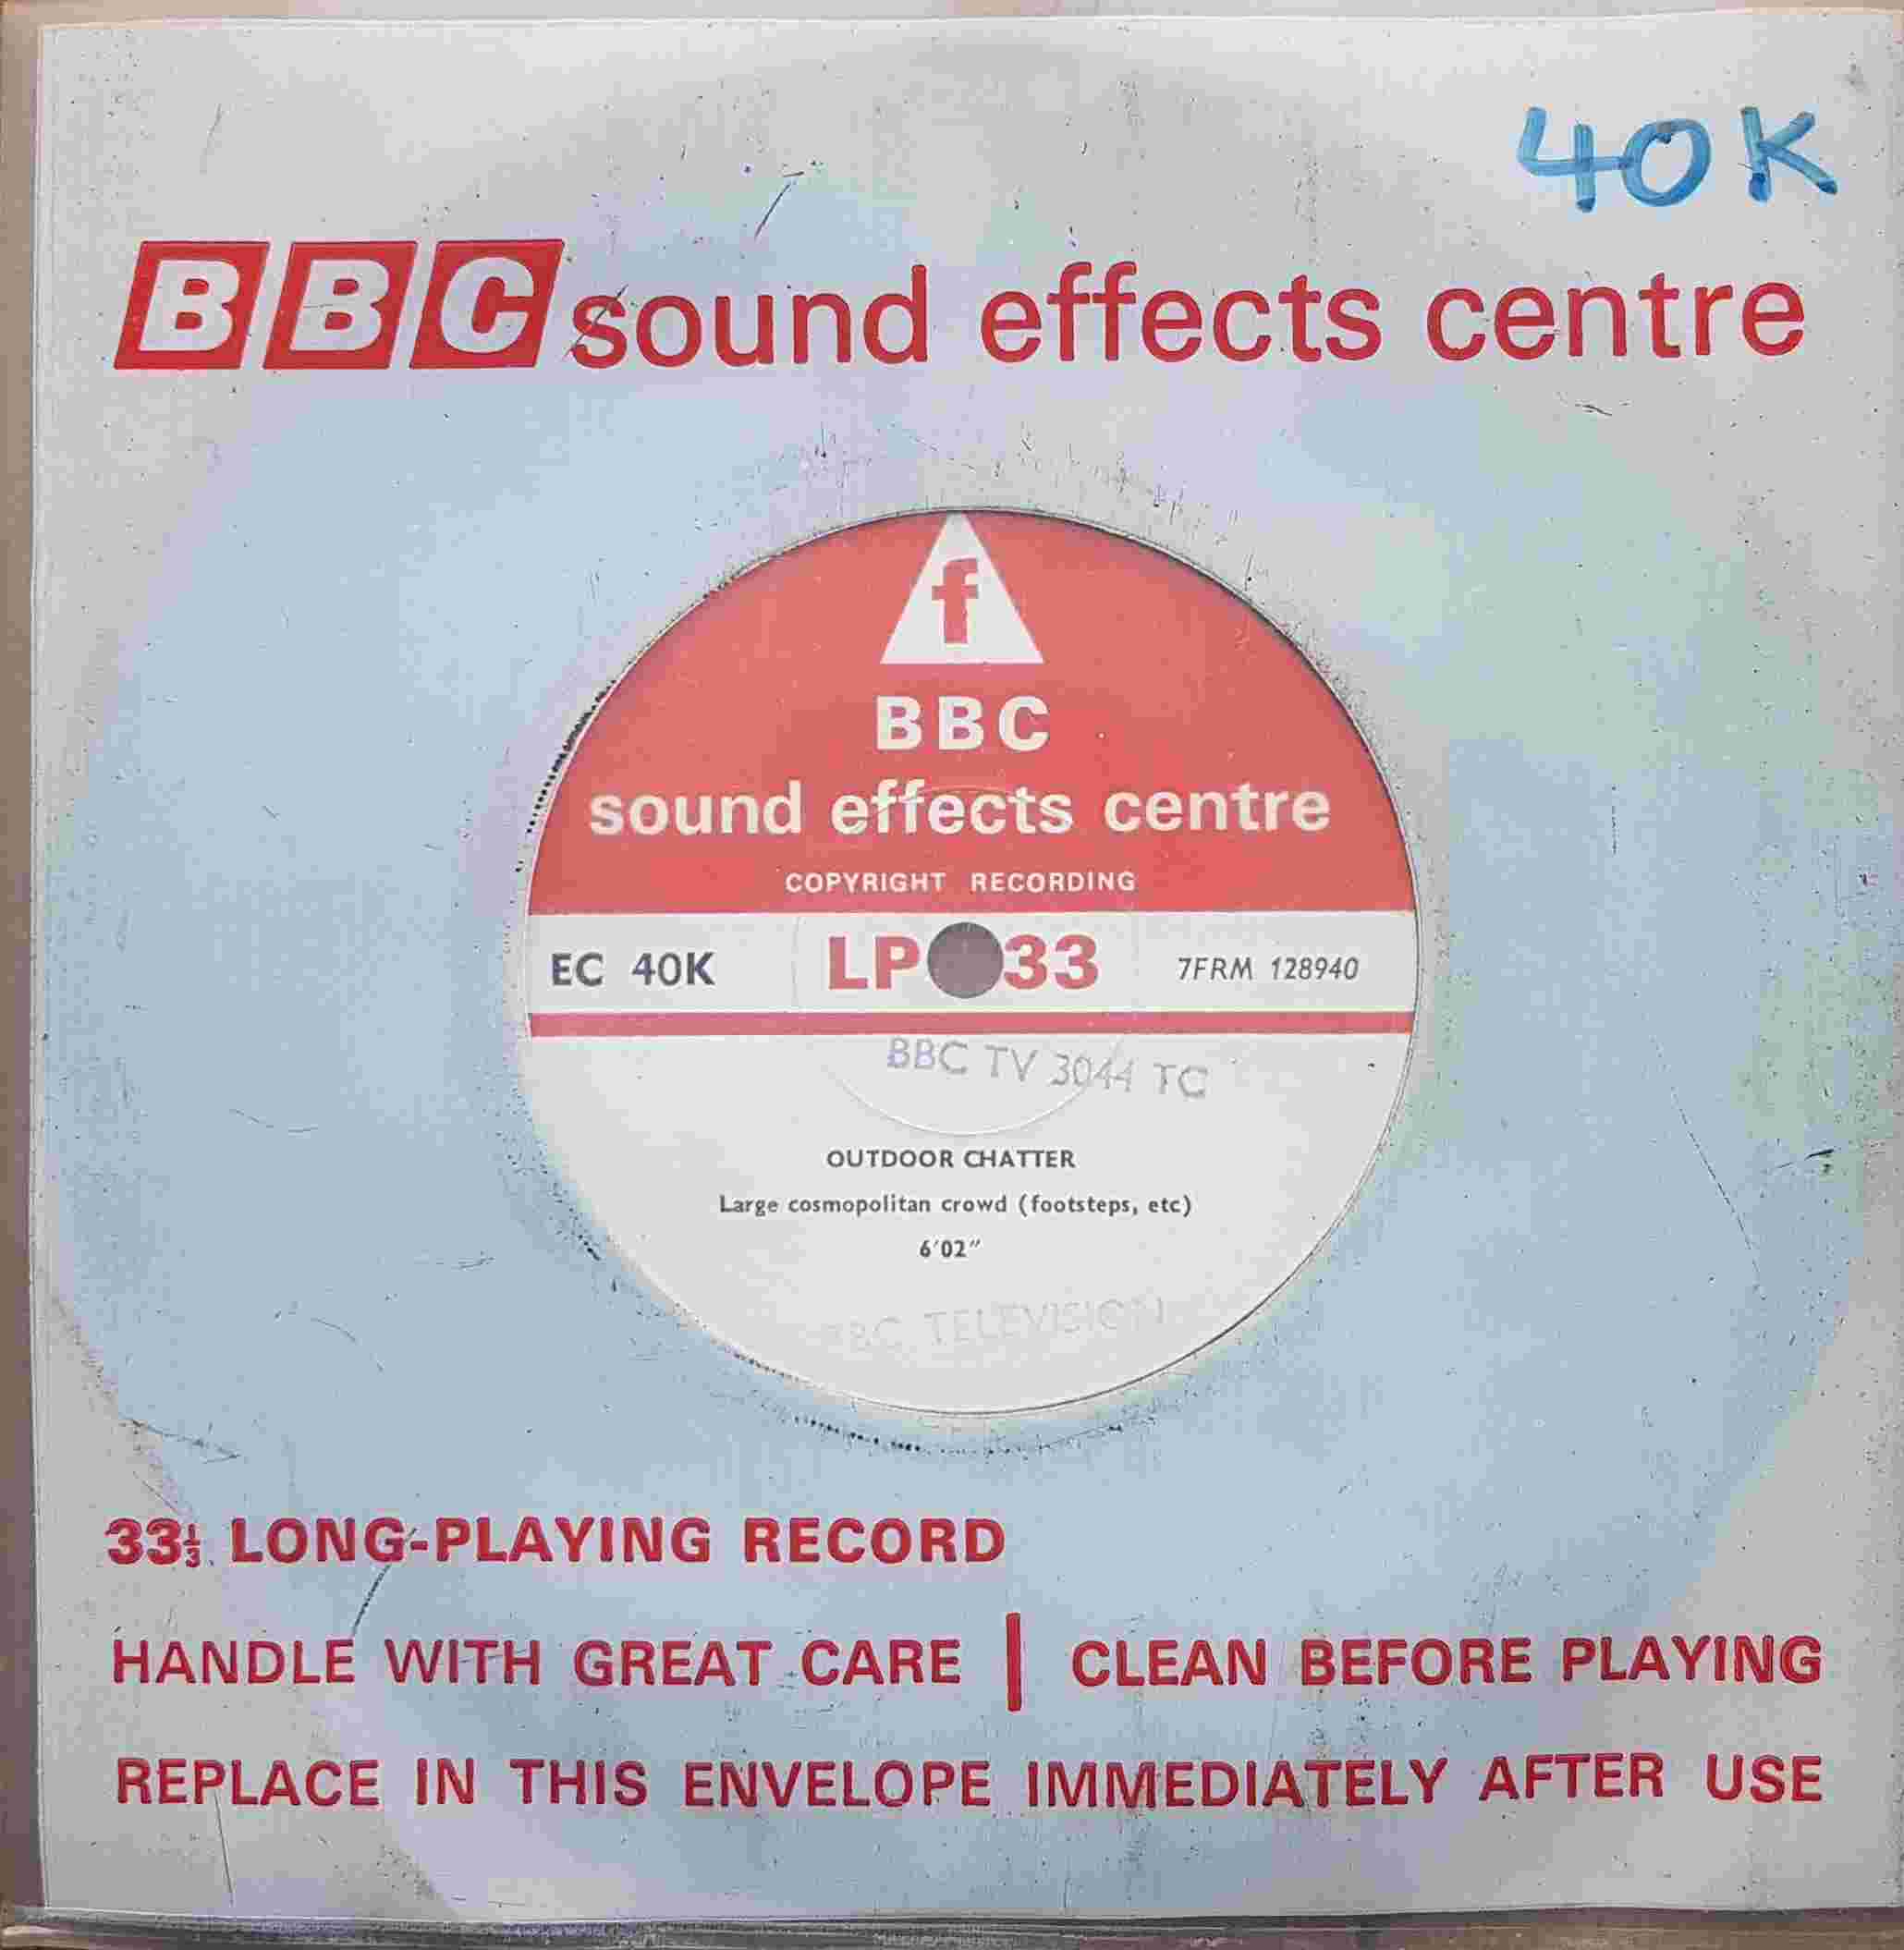 Picture of EC 40K Outdoor chatter / Indoor crowds - small group (English) by artist Not registered from the BBC records and Tapes library